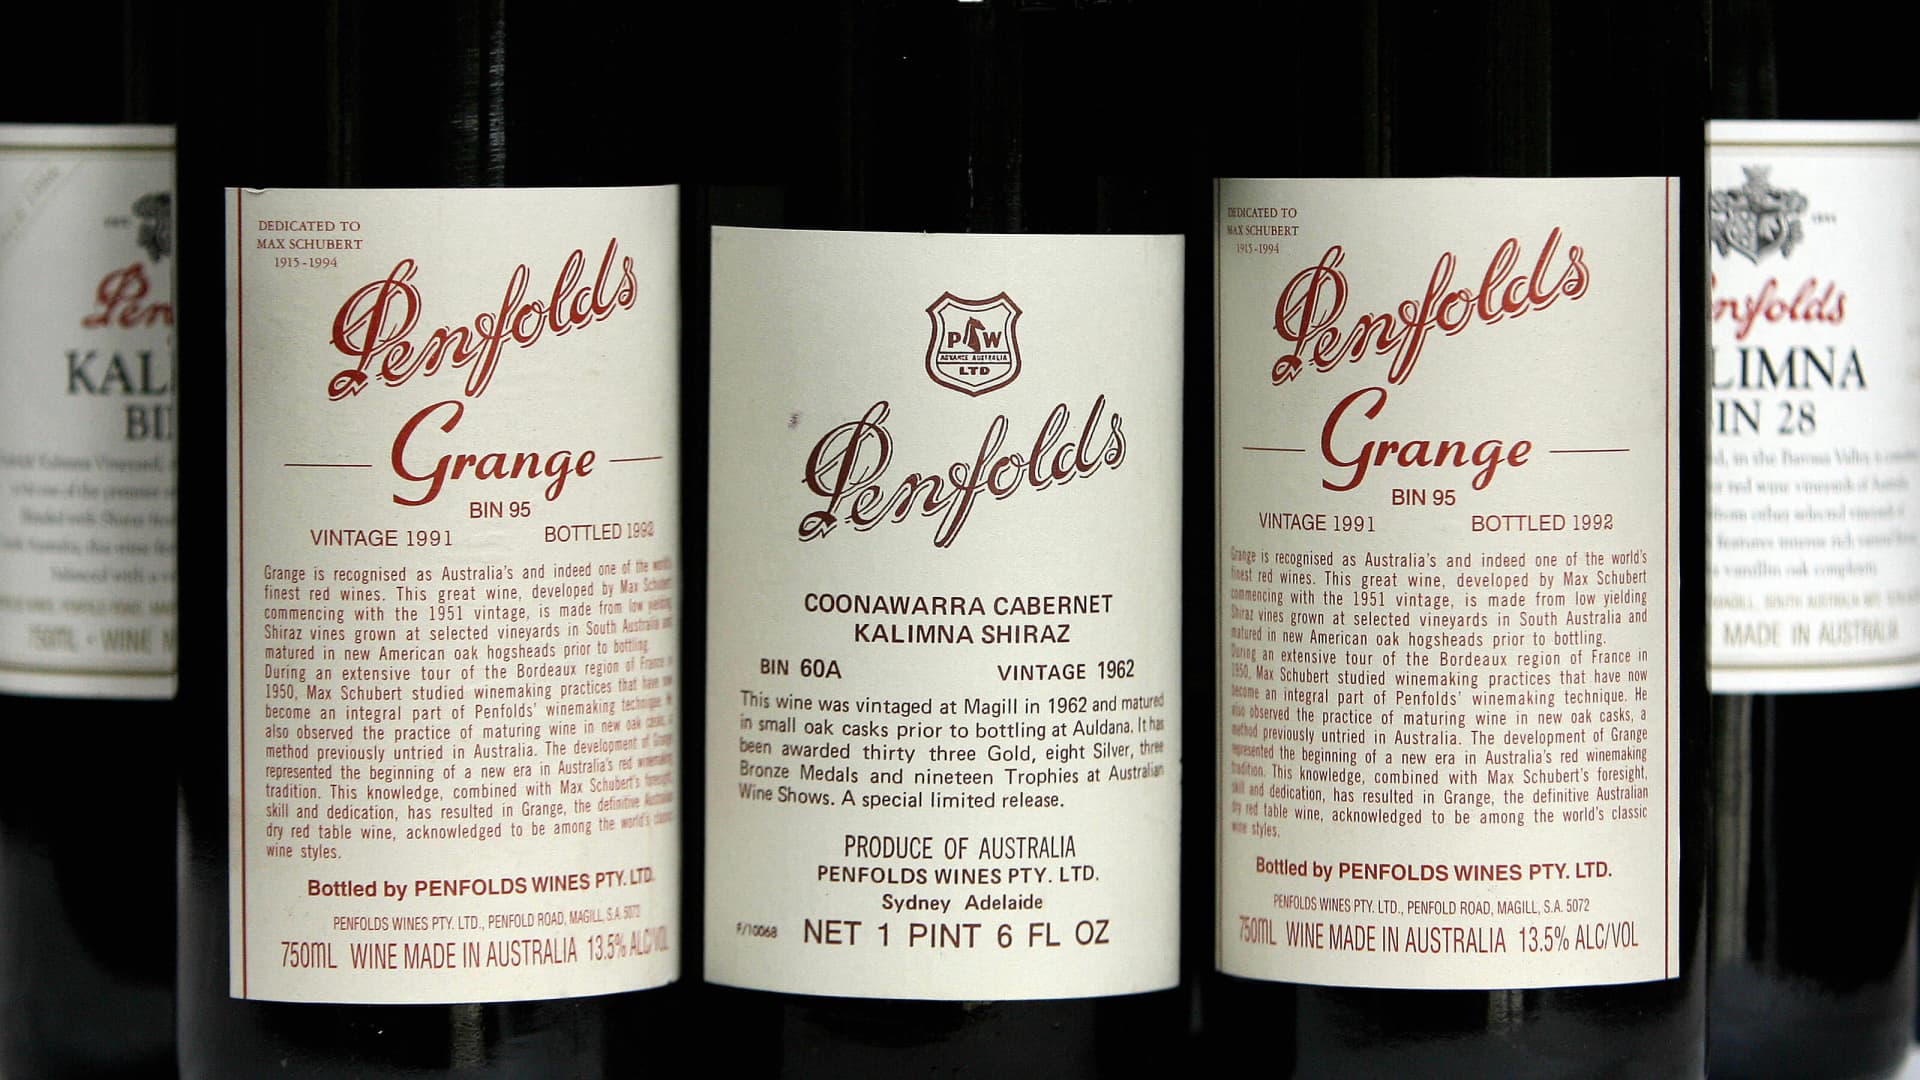 Penfolds Grange red wines at a special re-corking clinic in Sydney, July 12, 2006.